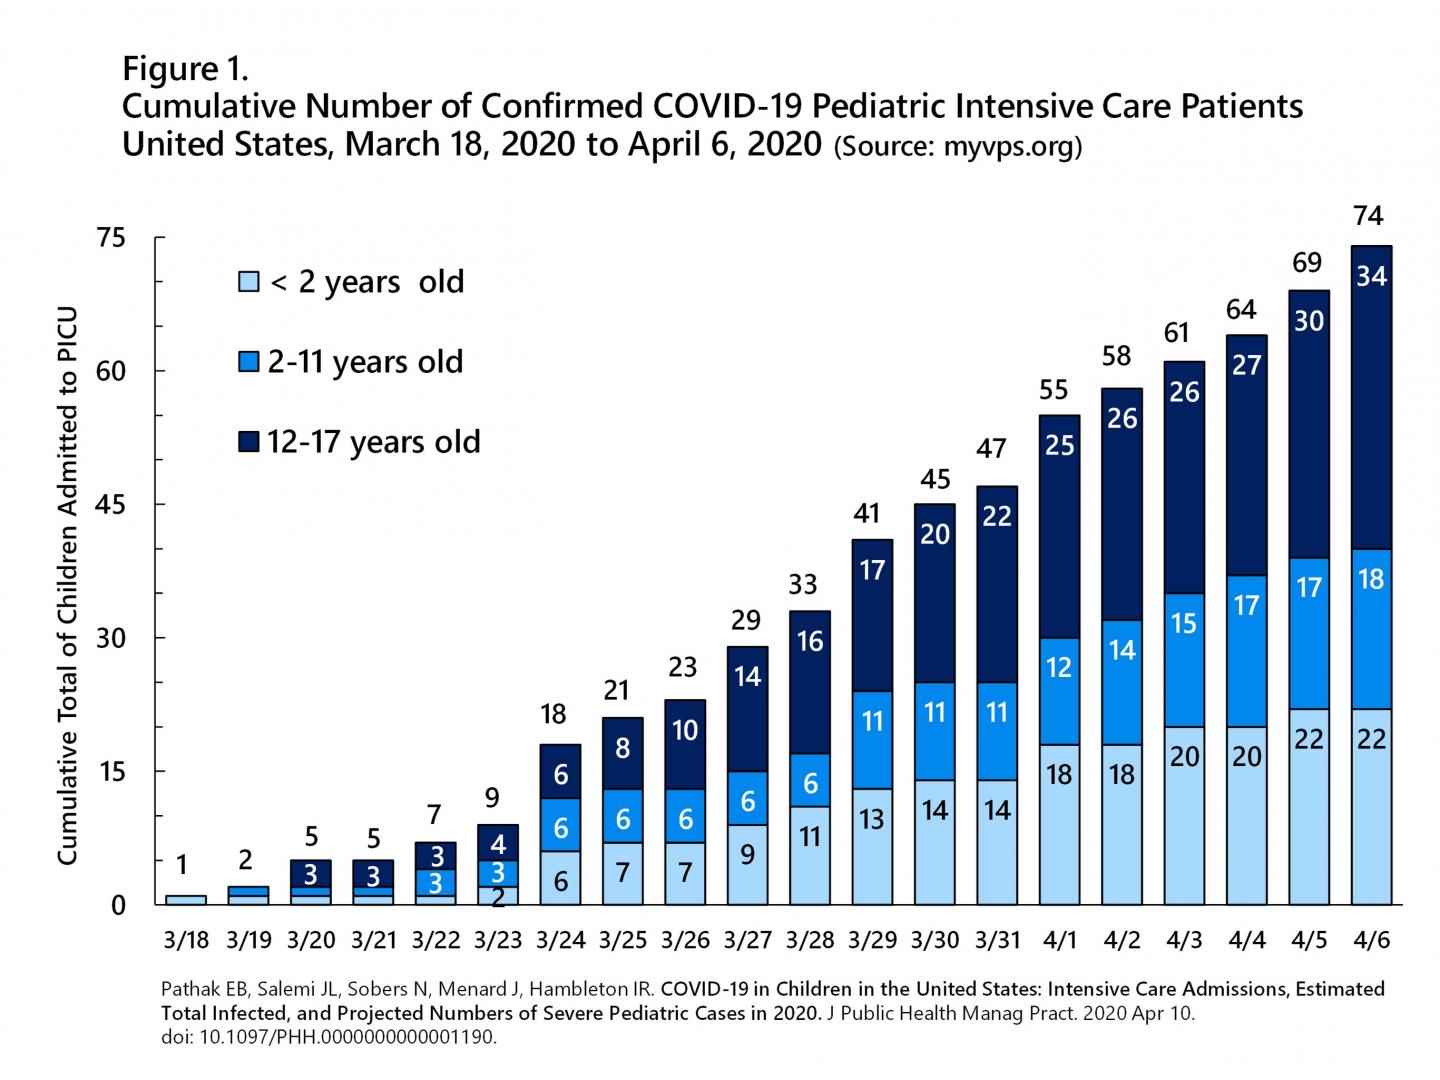 Cumulative number of confirmed COVID-19 pediatric intensive care patients United States